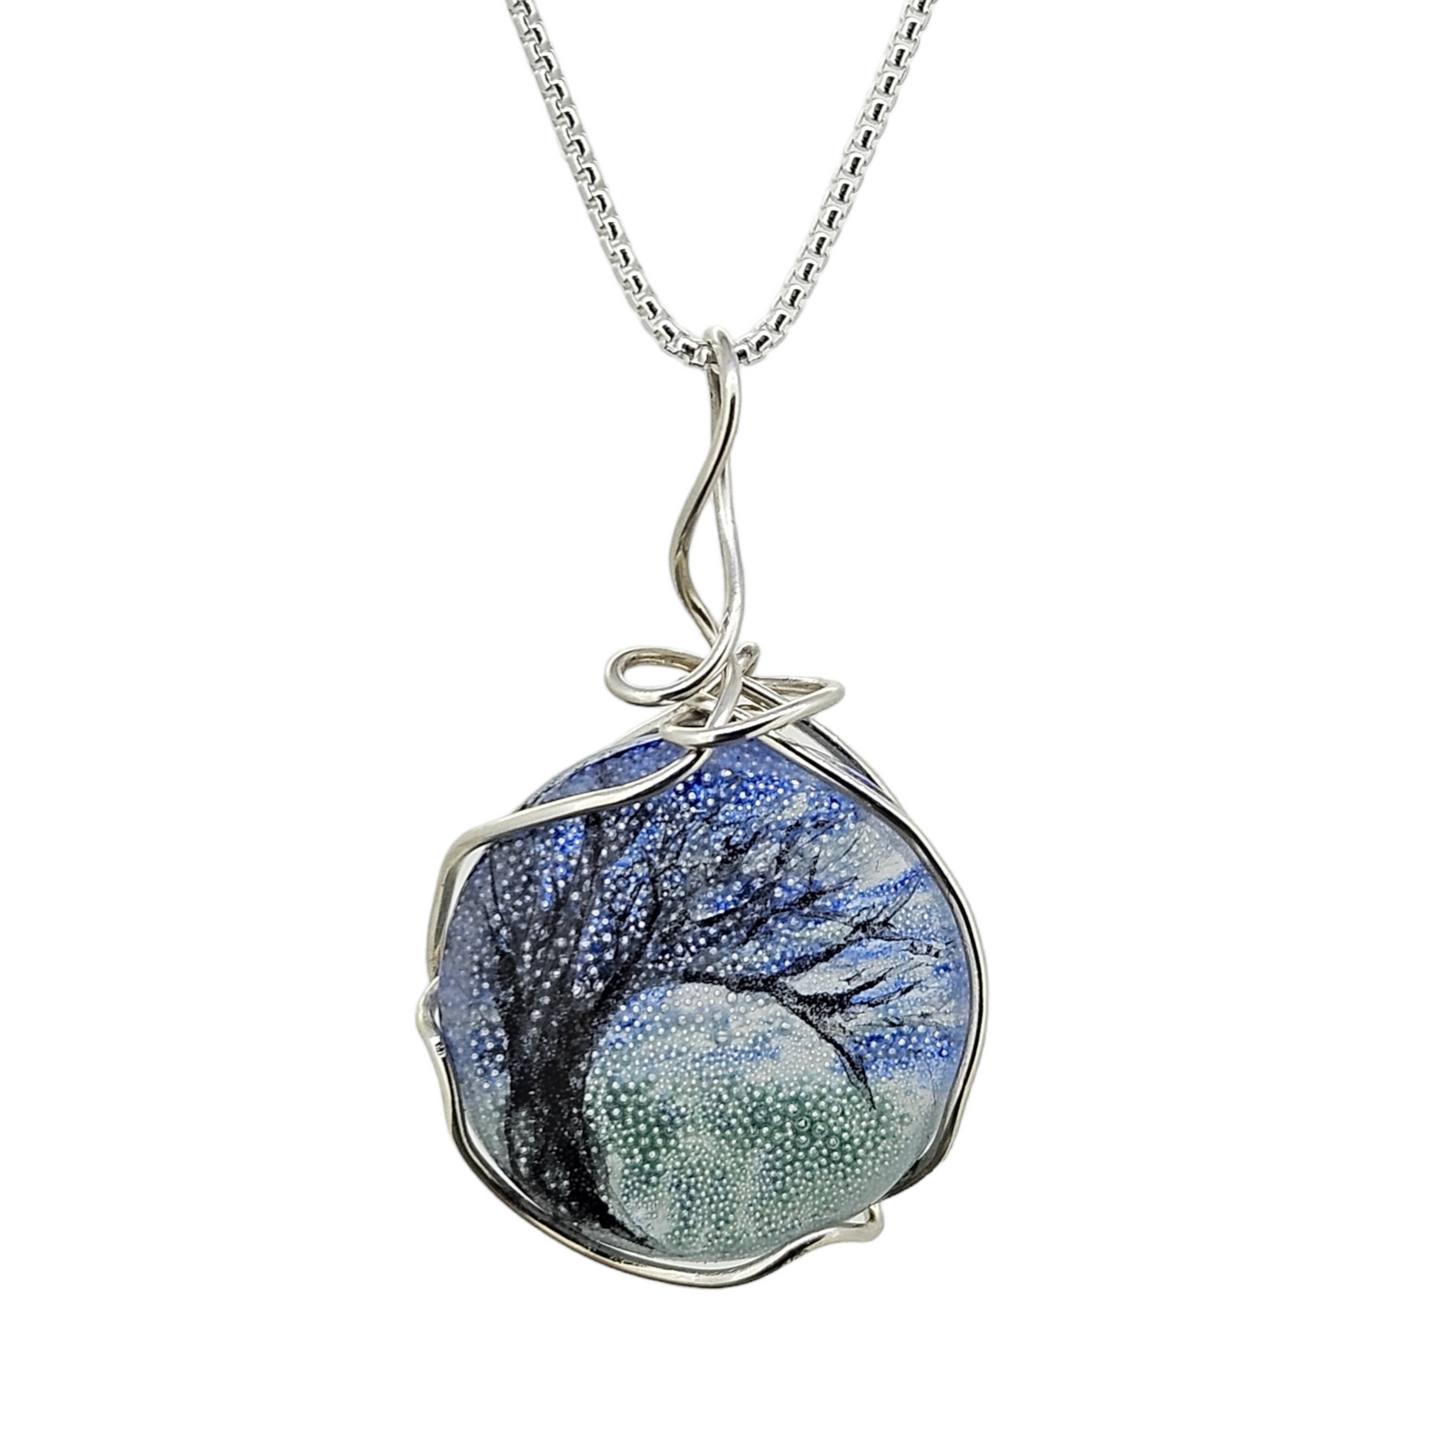 Hand Painted Fused Glass Tree Necklace